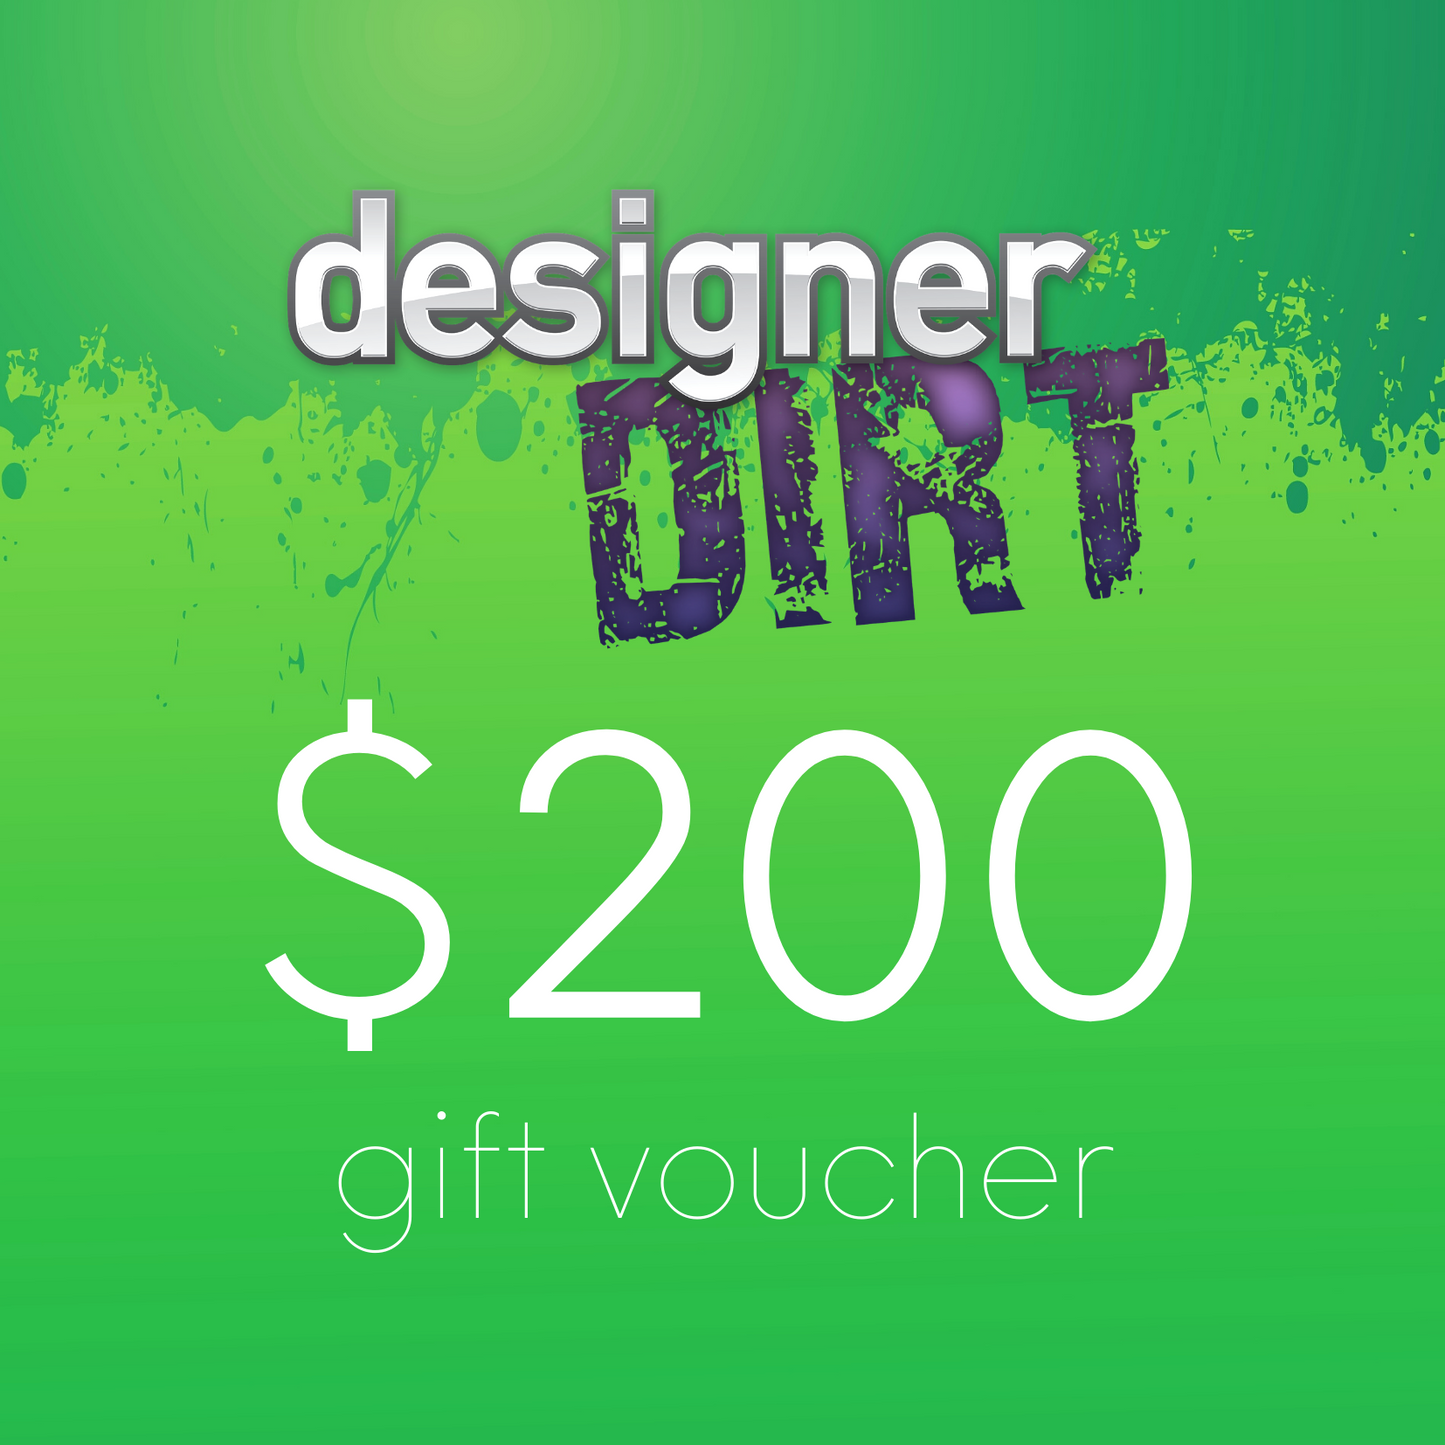 Designer Dirt $200 gift card. Buy a gift certificate or voucher for a present if you can't decide what to buy